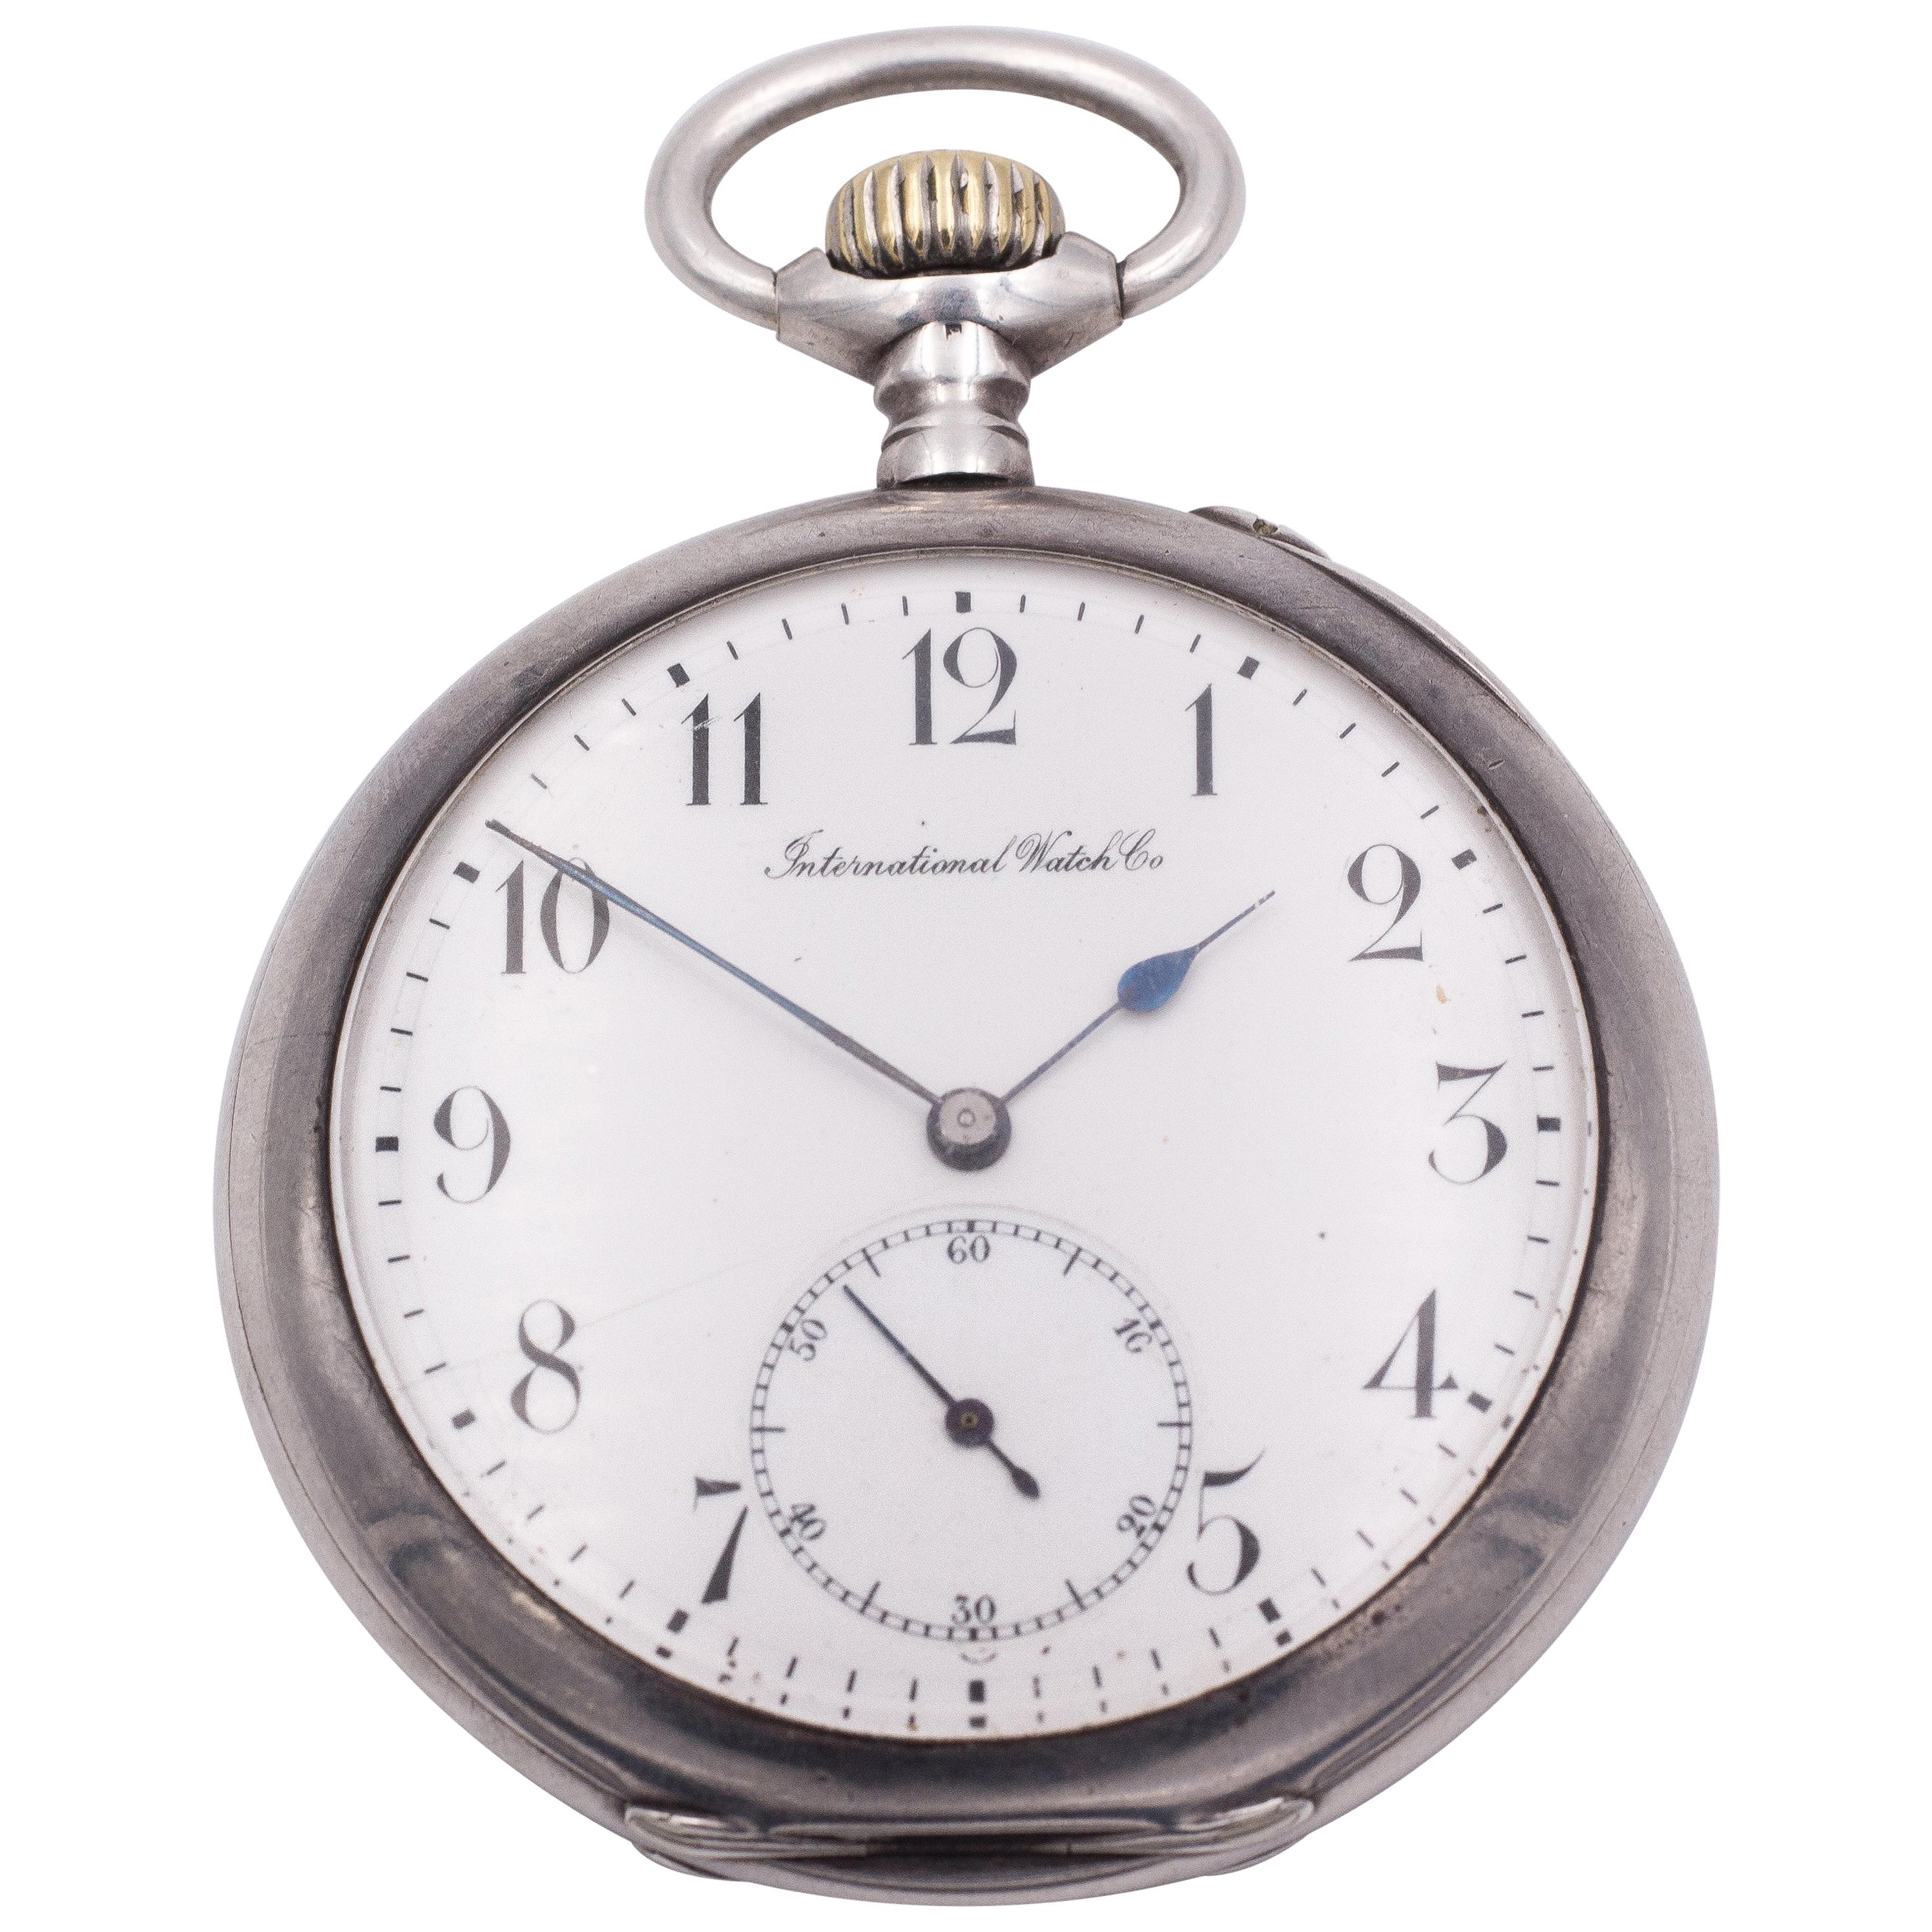 Antique Silver IWC International Watch Company Pocket Watch, Late 19th Century For Sale